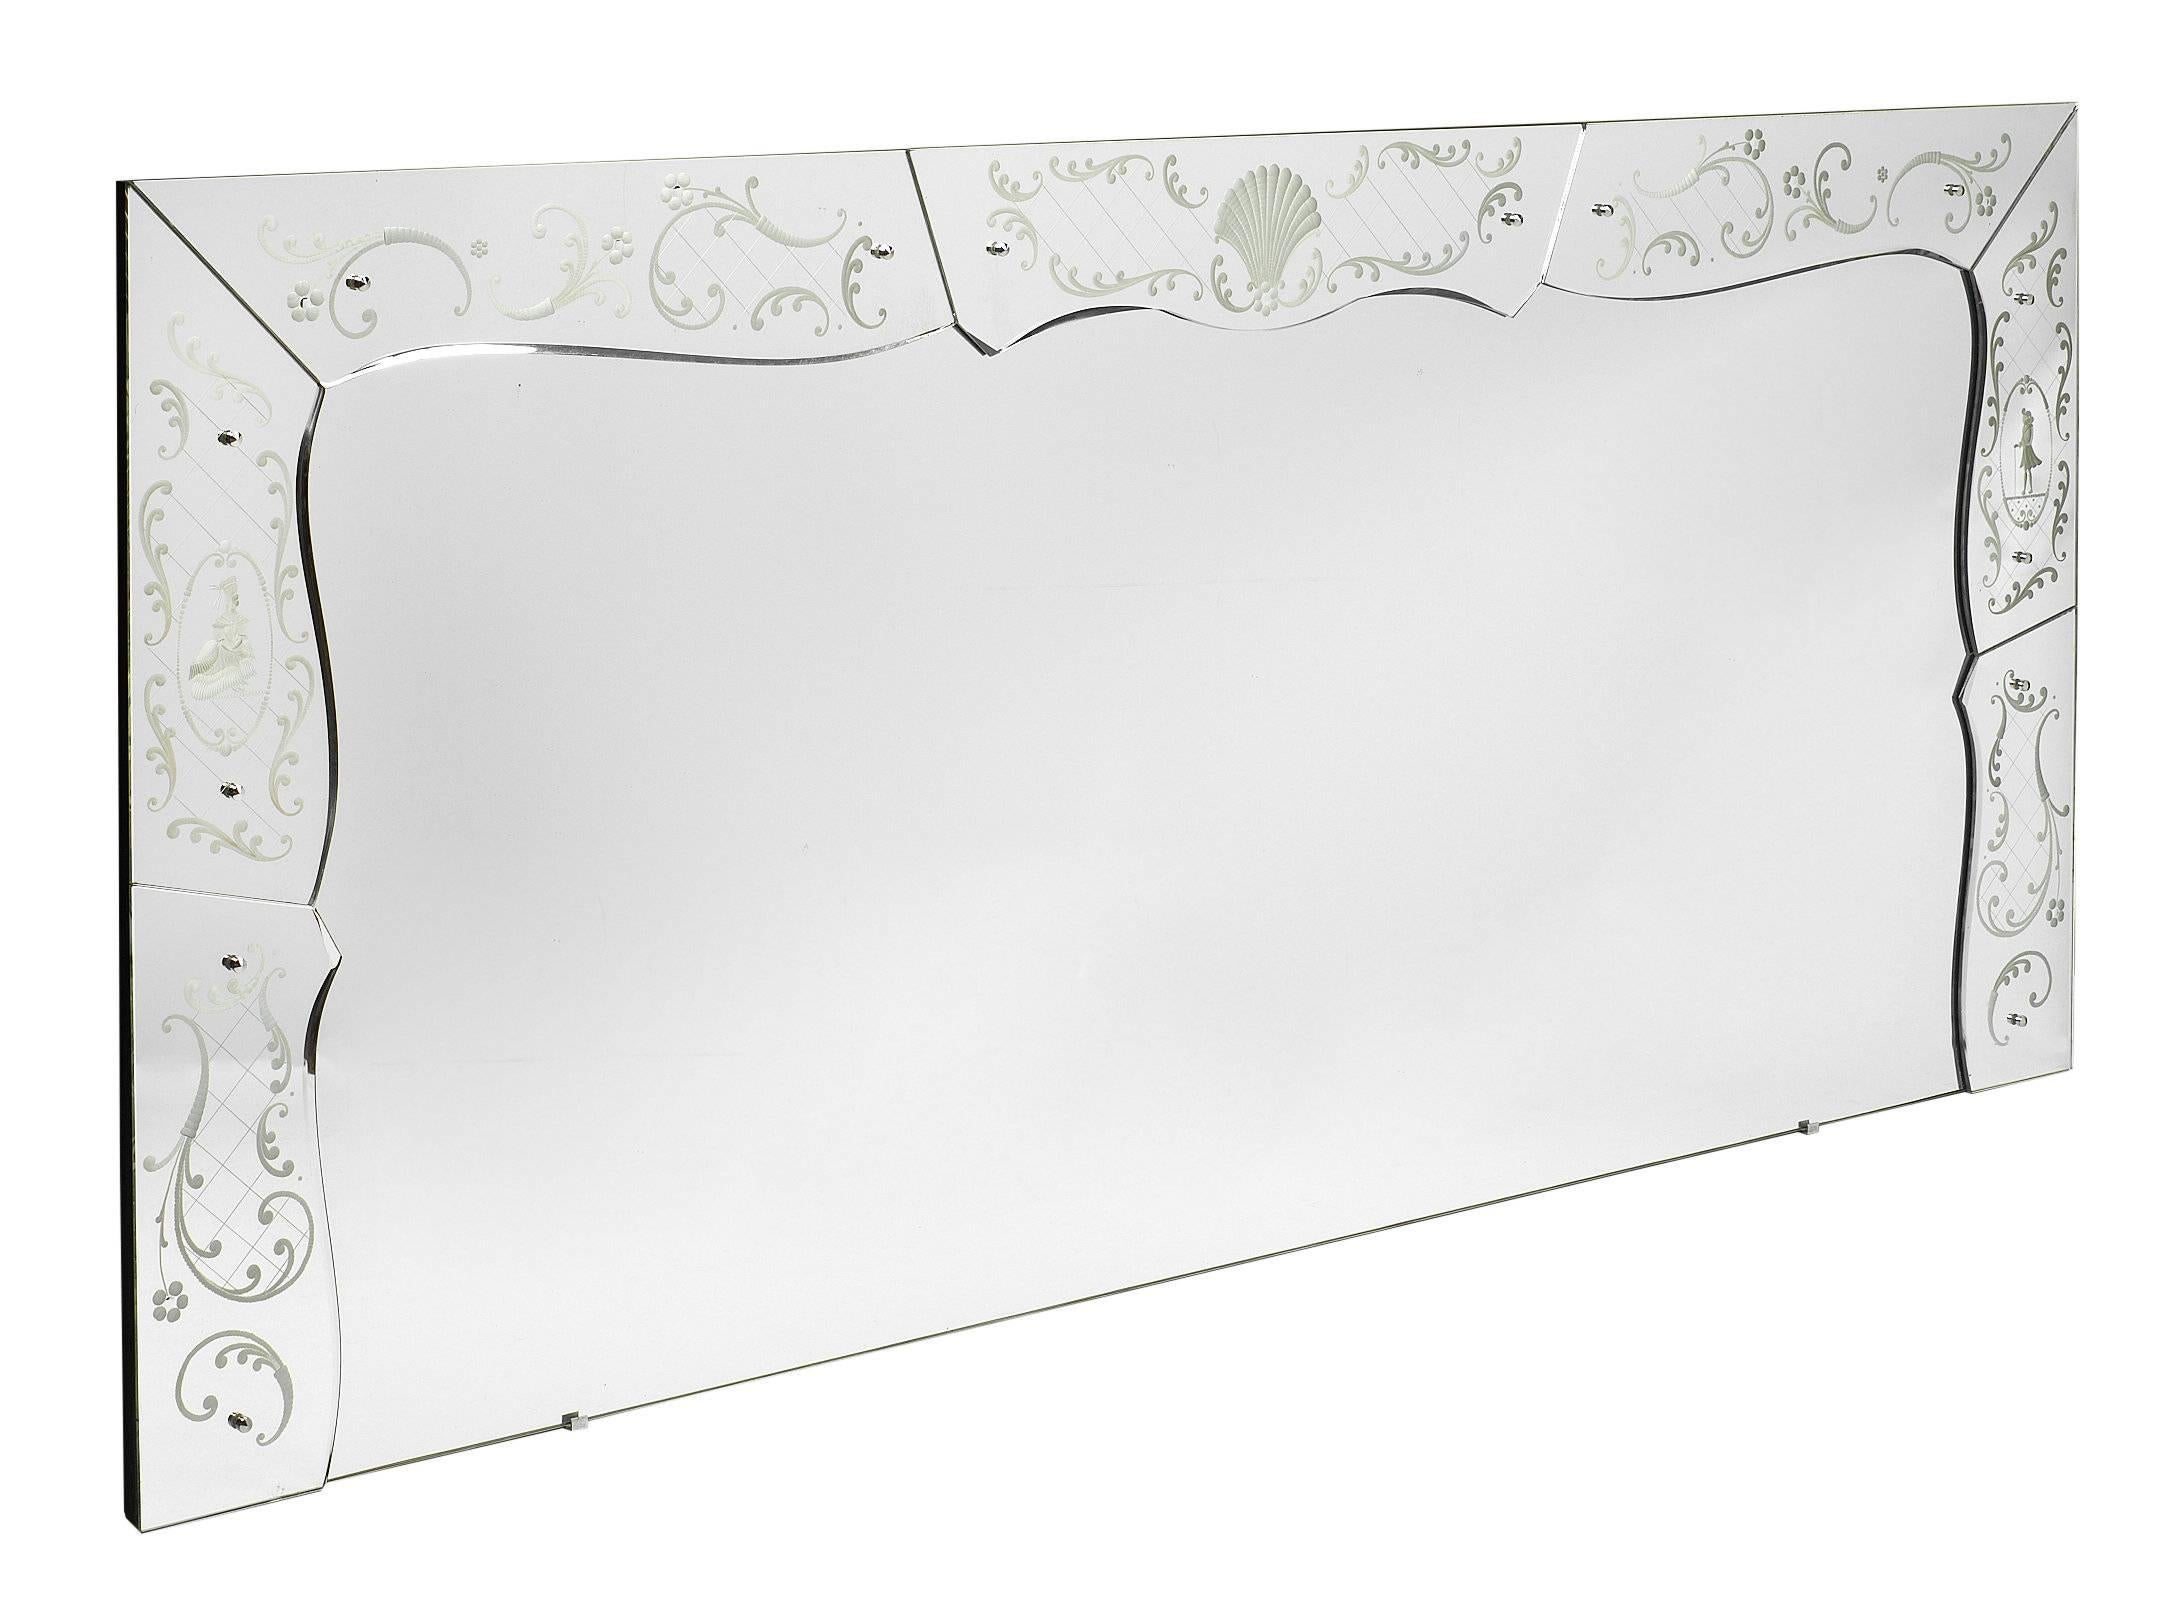 This extra large Venetian mirror from the Art Deco period is stunning in its magnitude and beauty! This marvellous piece has a long rectangular mirror framed by chiselled mirror pieces. There is a lot of ribbon and floral detailing engraved